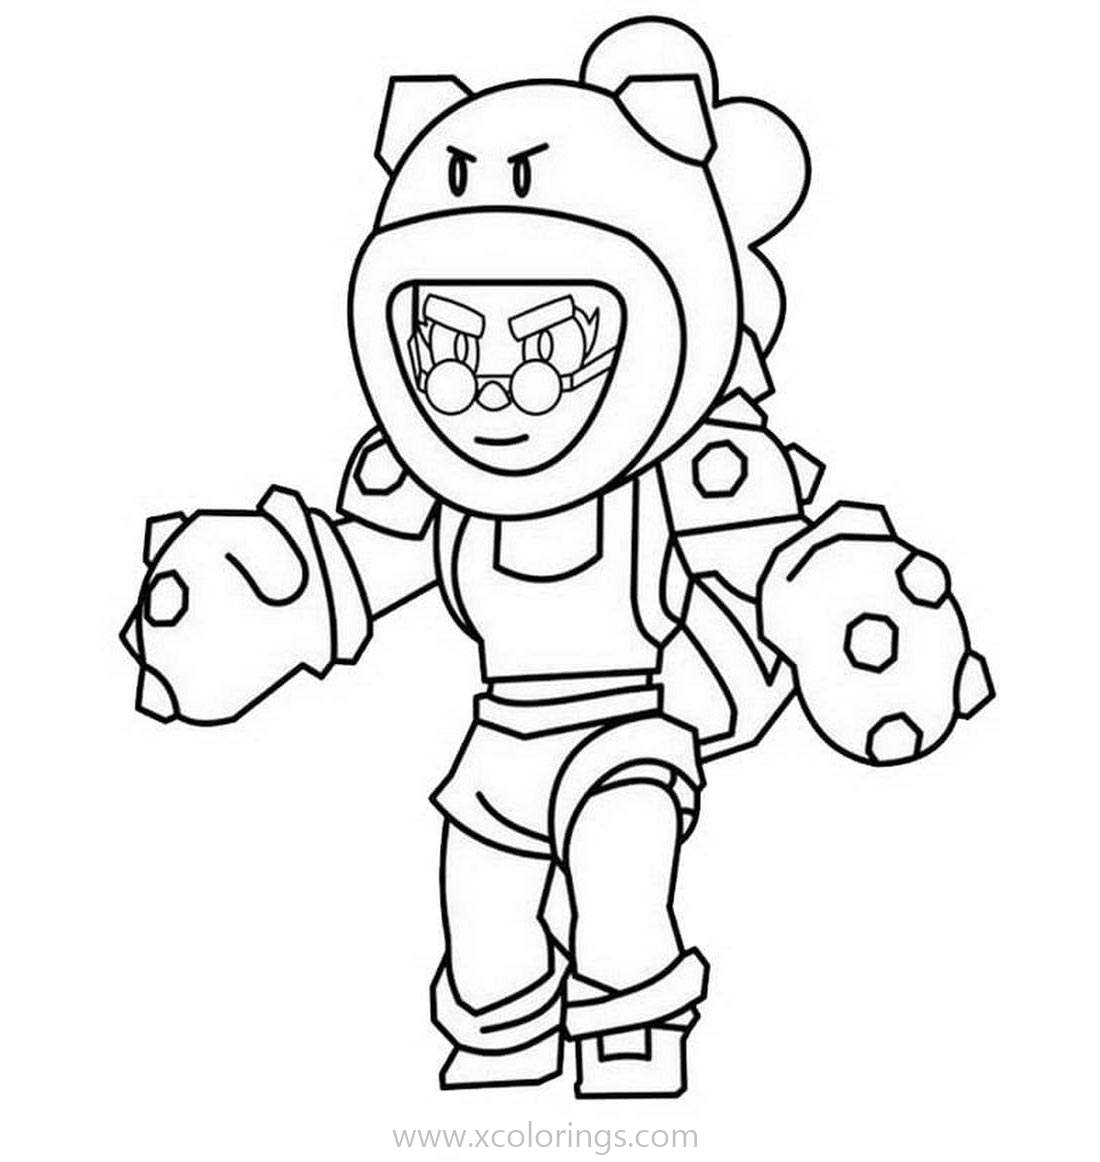 Brawl Stars Coloring Pages Rose the Boxer - XColorings.com